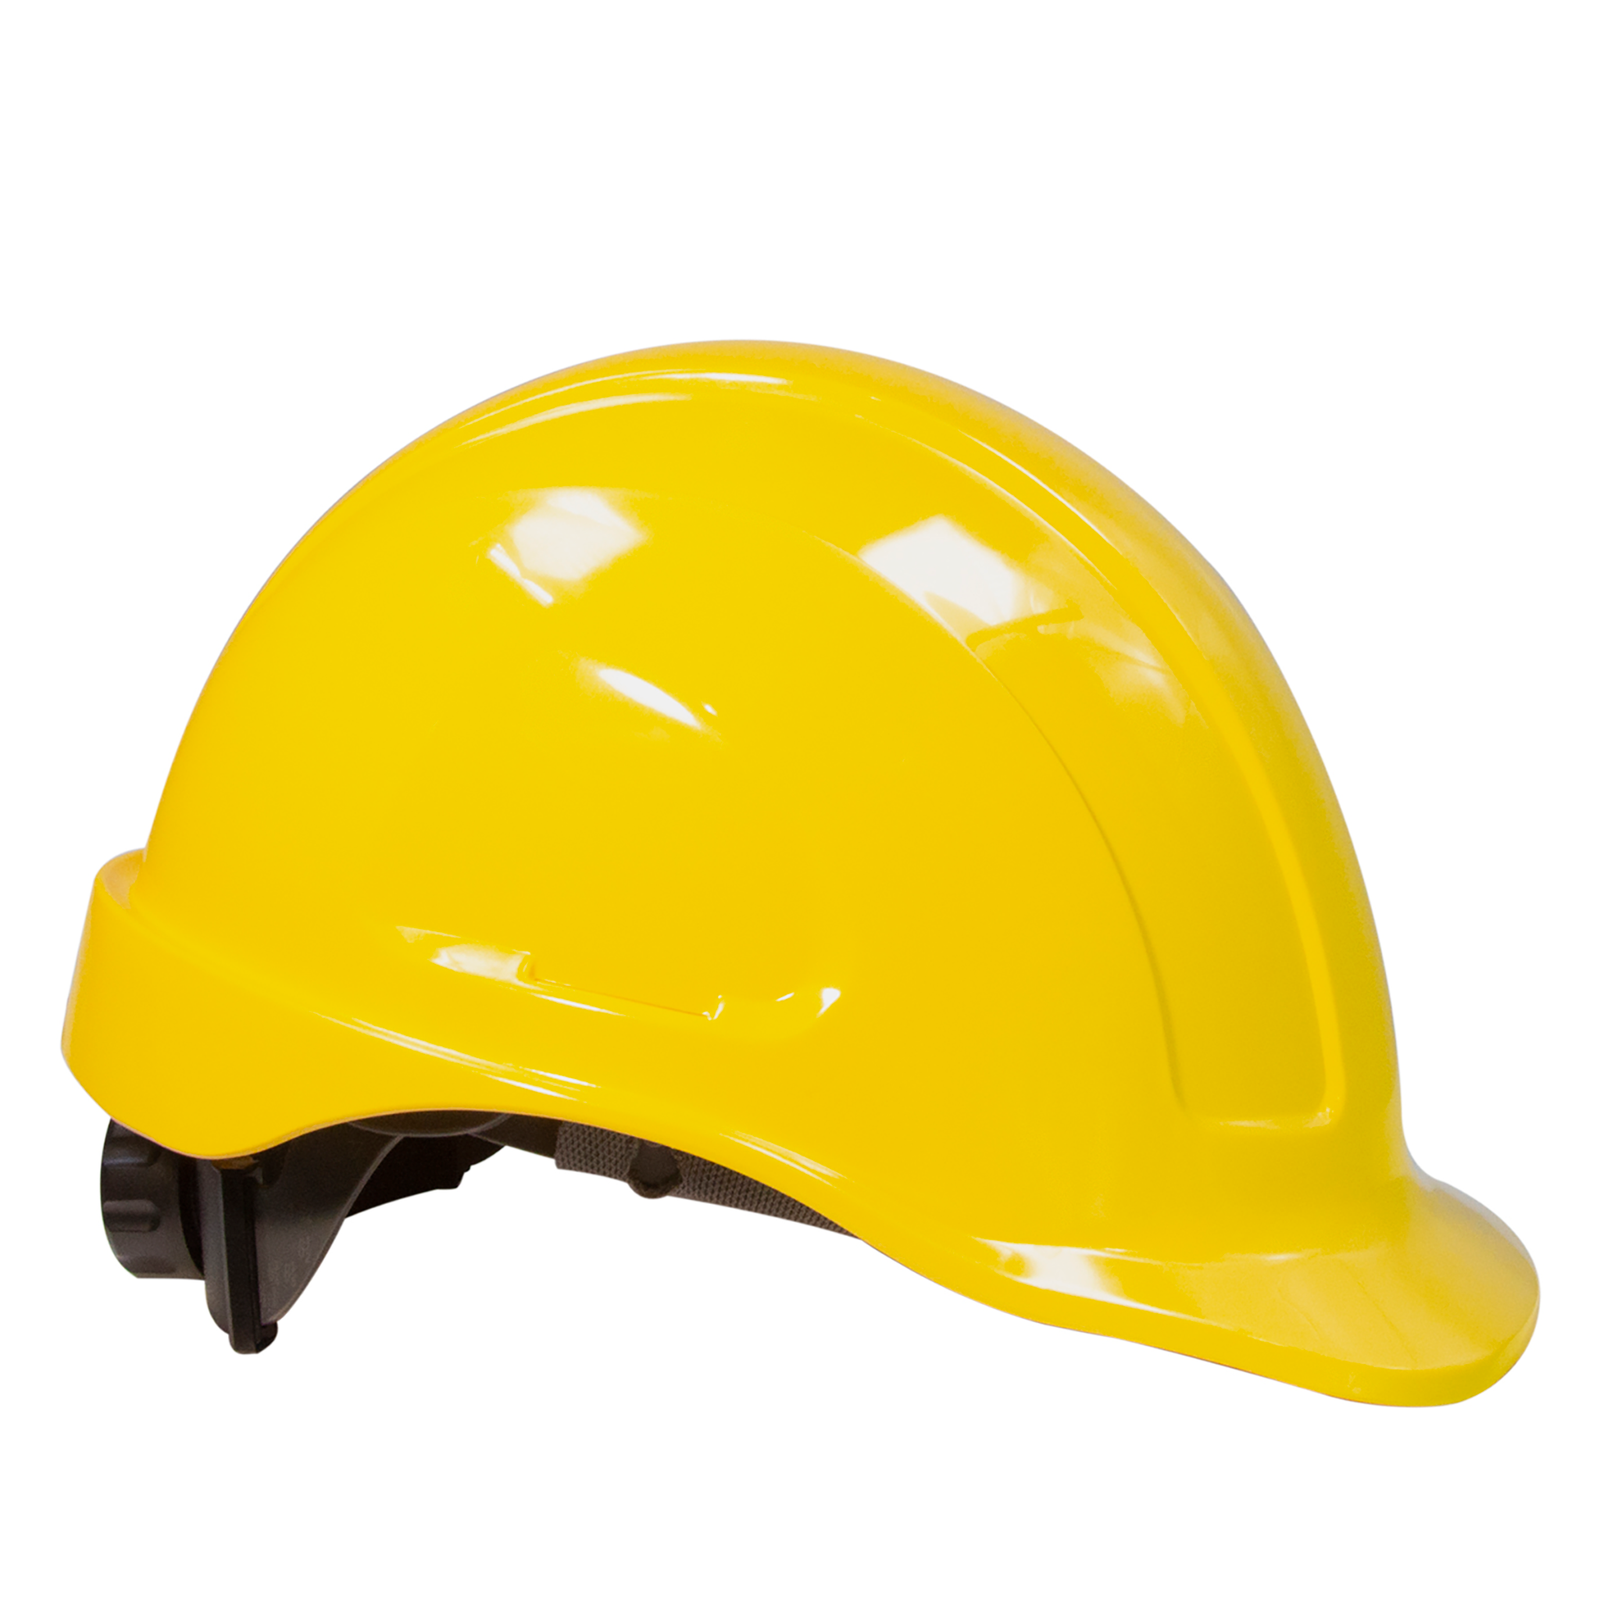 ANSI Compliant Cap stile Hard hat for head protection from falling objects and more